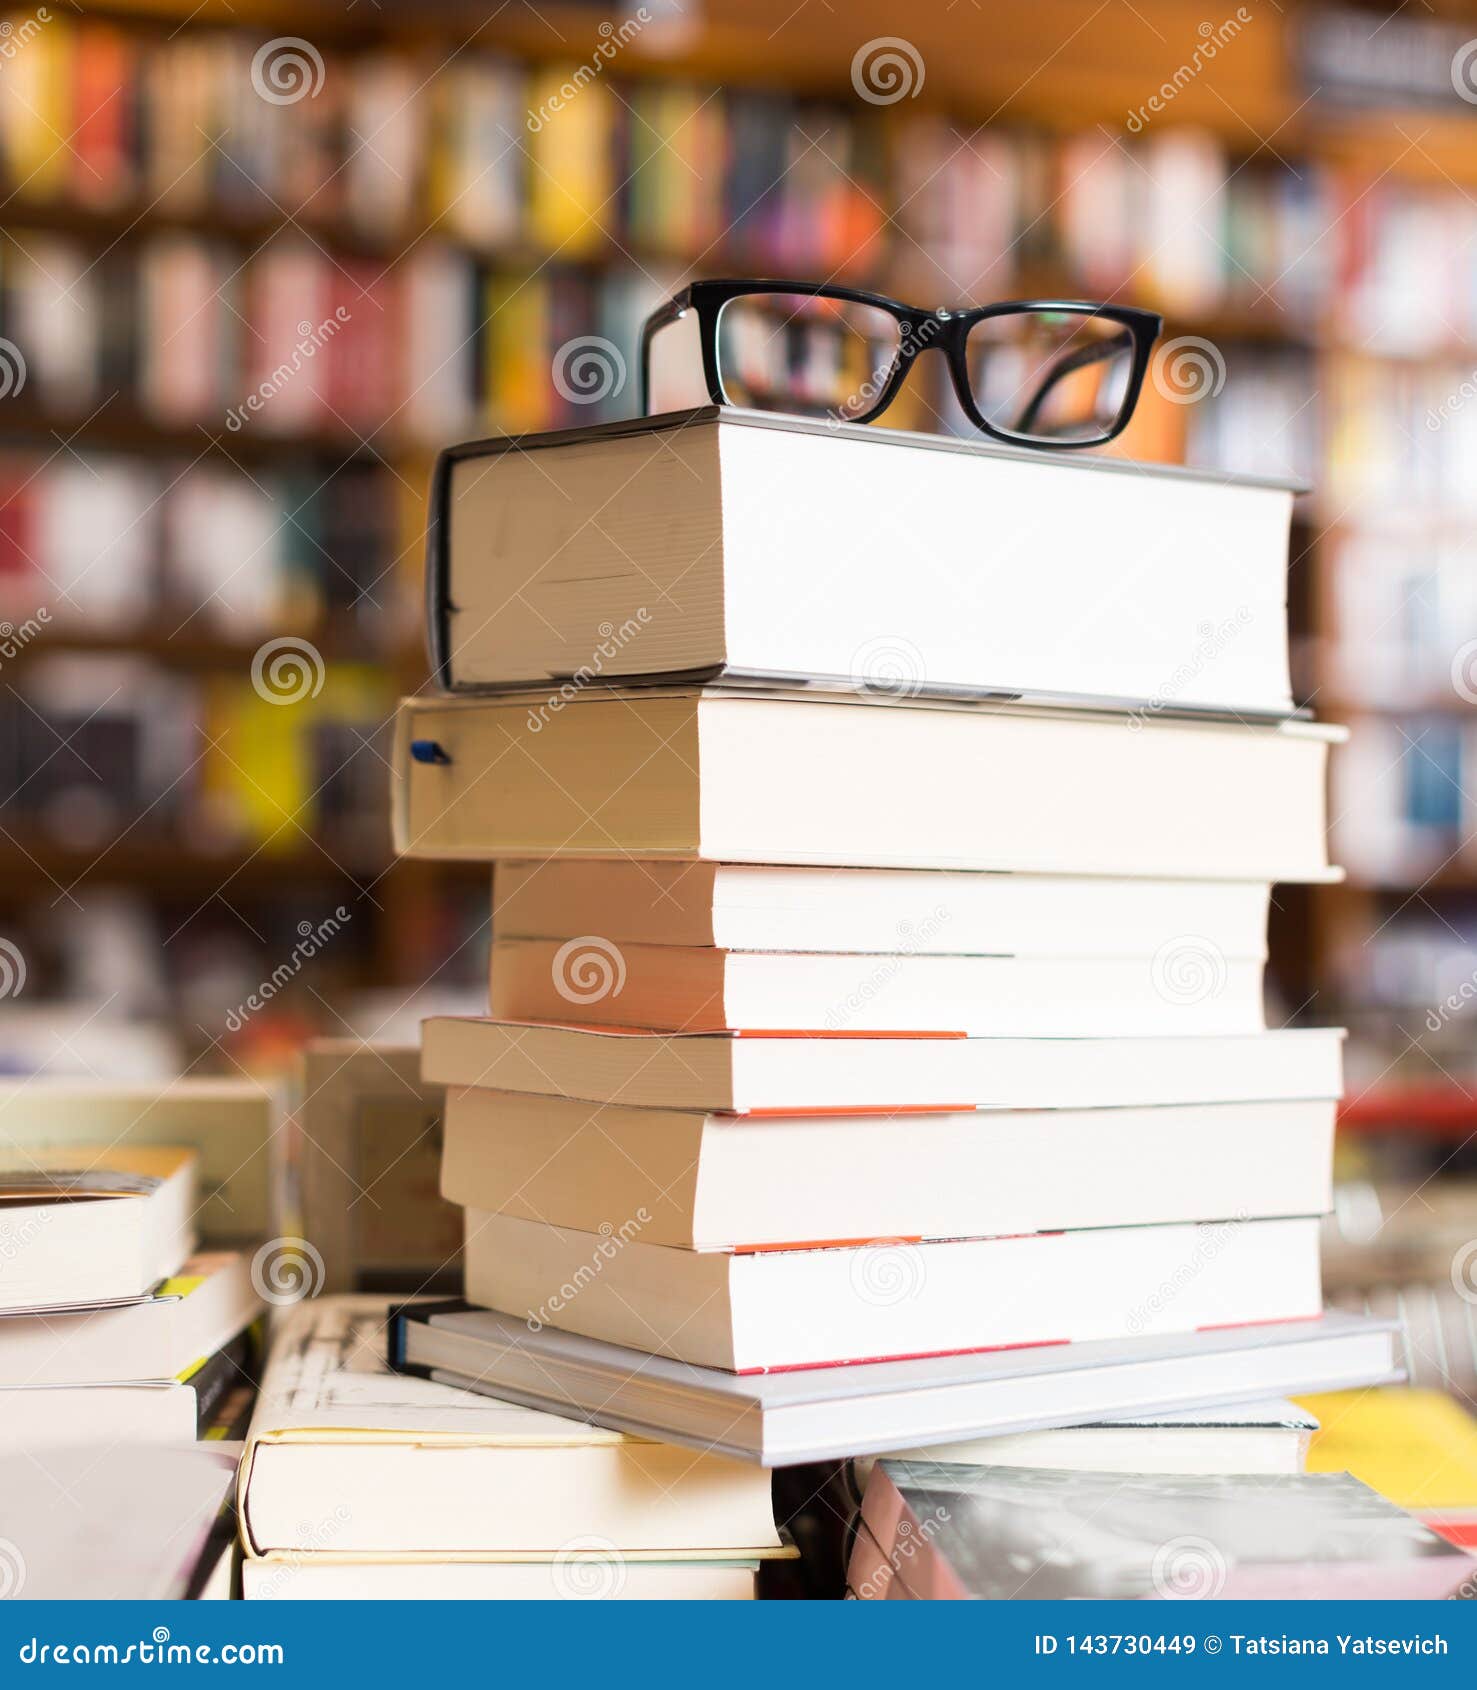 Glasses On Top Of Stack Of Books Lying On Table In Bookstore Stock 